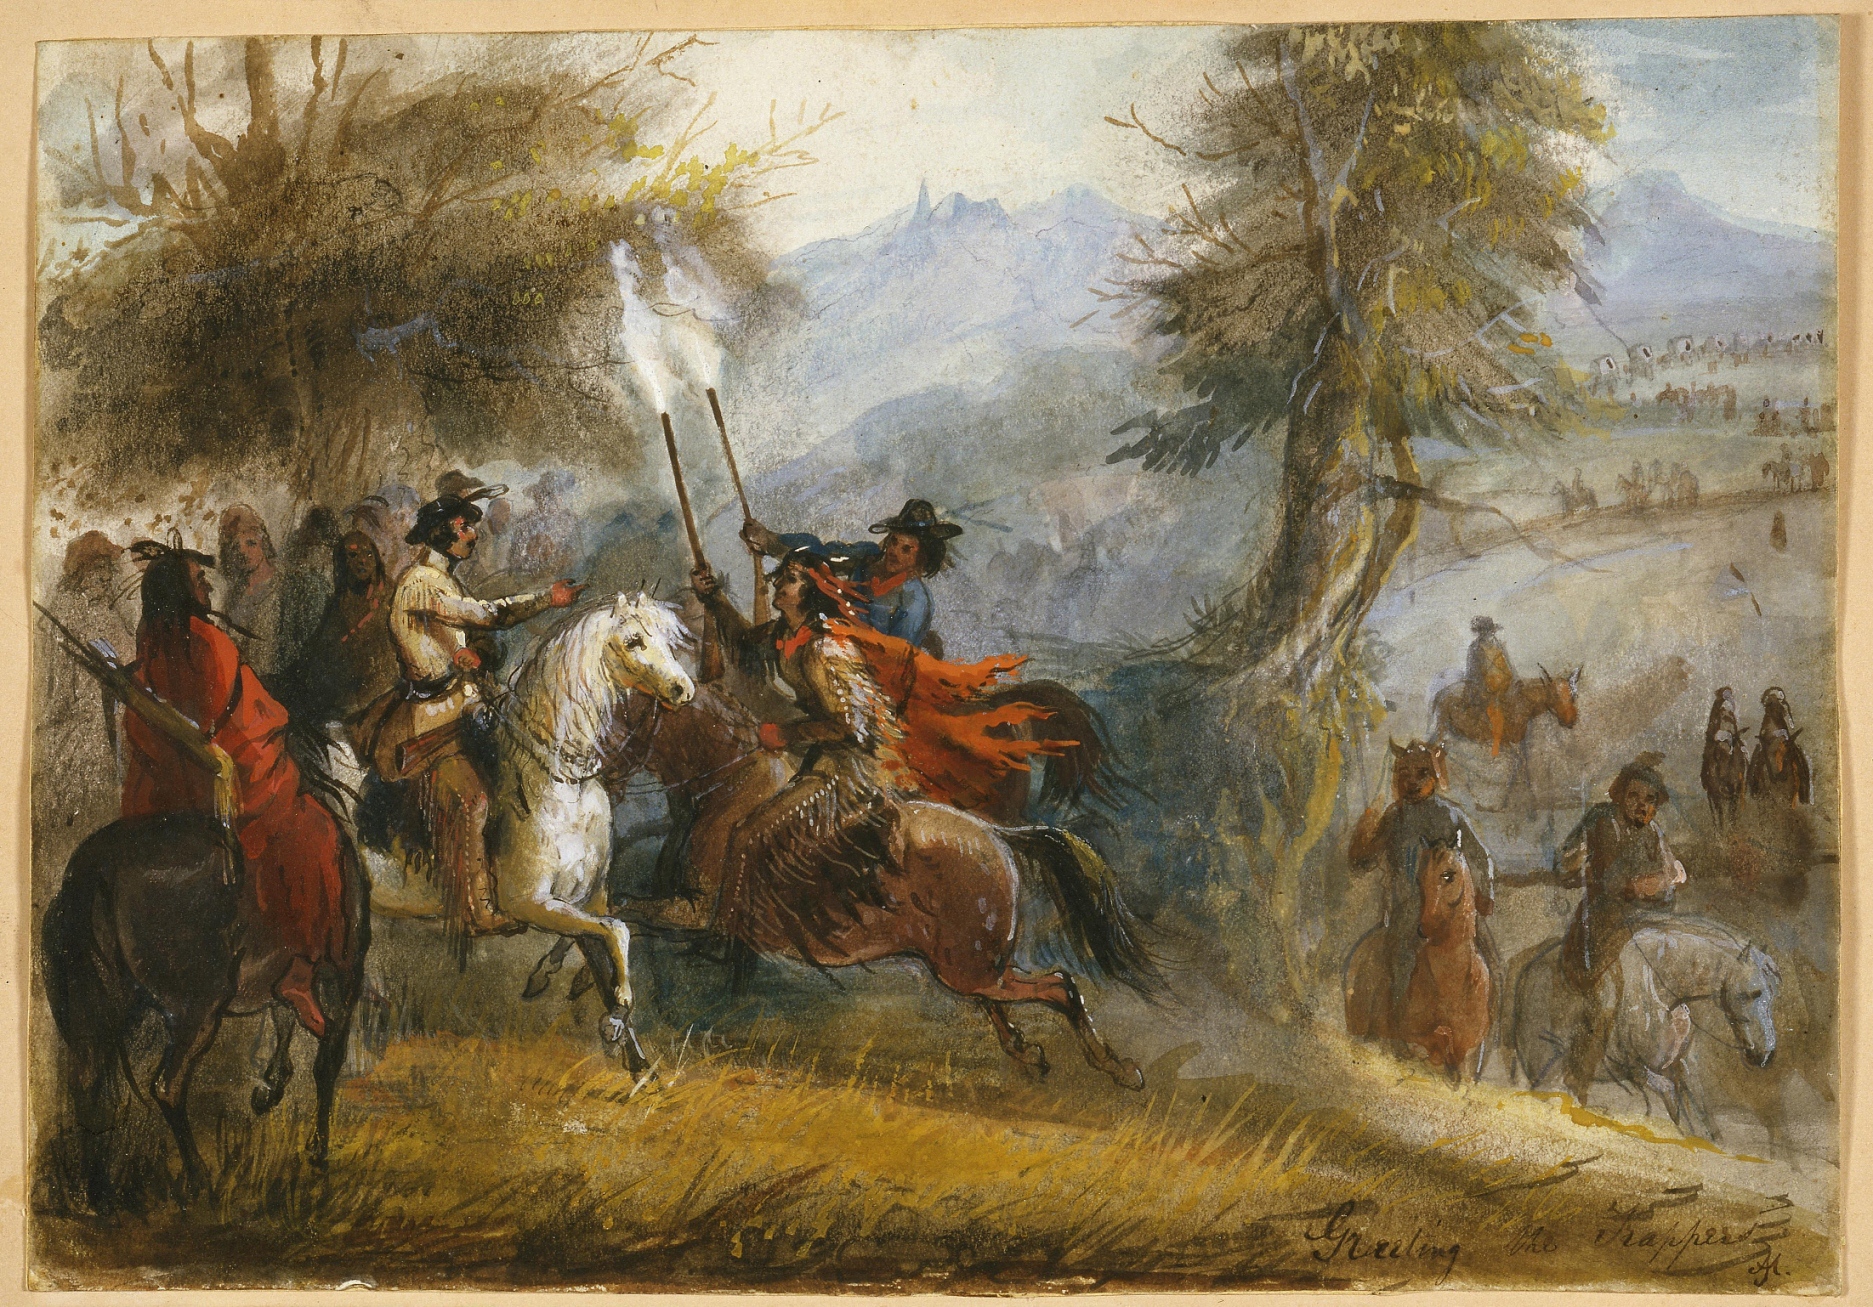 Alfred Jacob Miller's "Greeting the Trappers," 1837